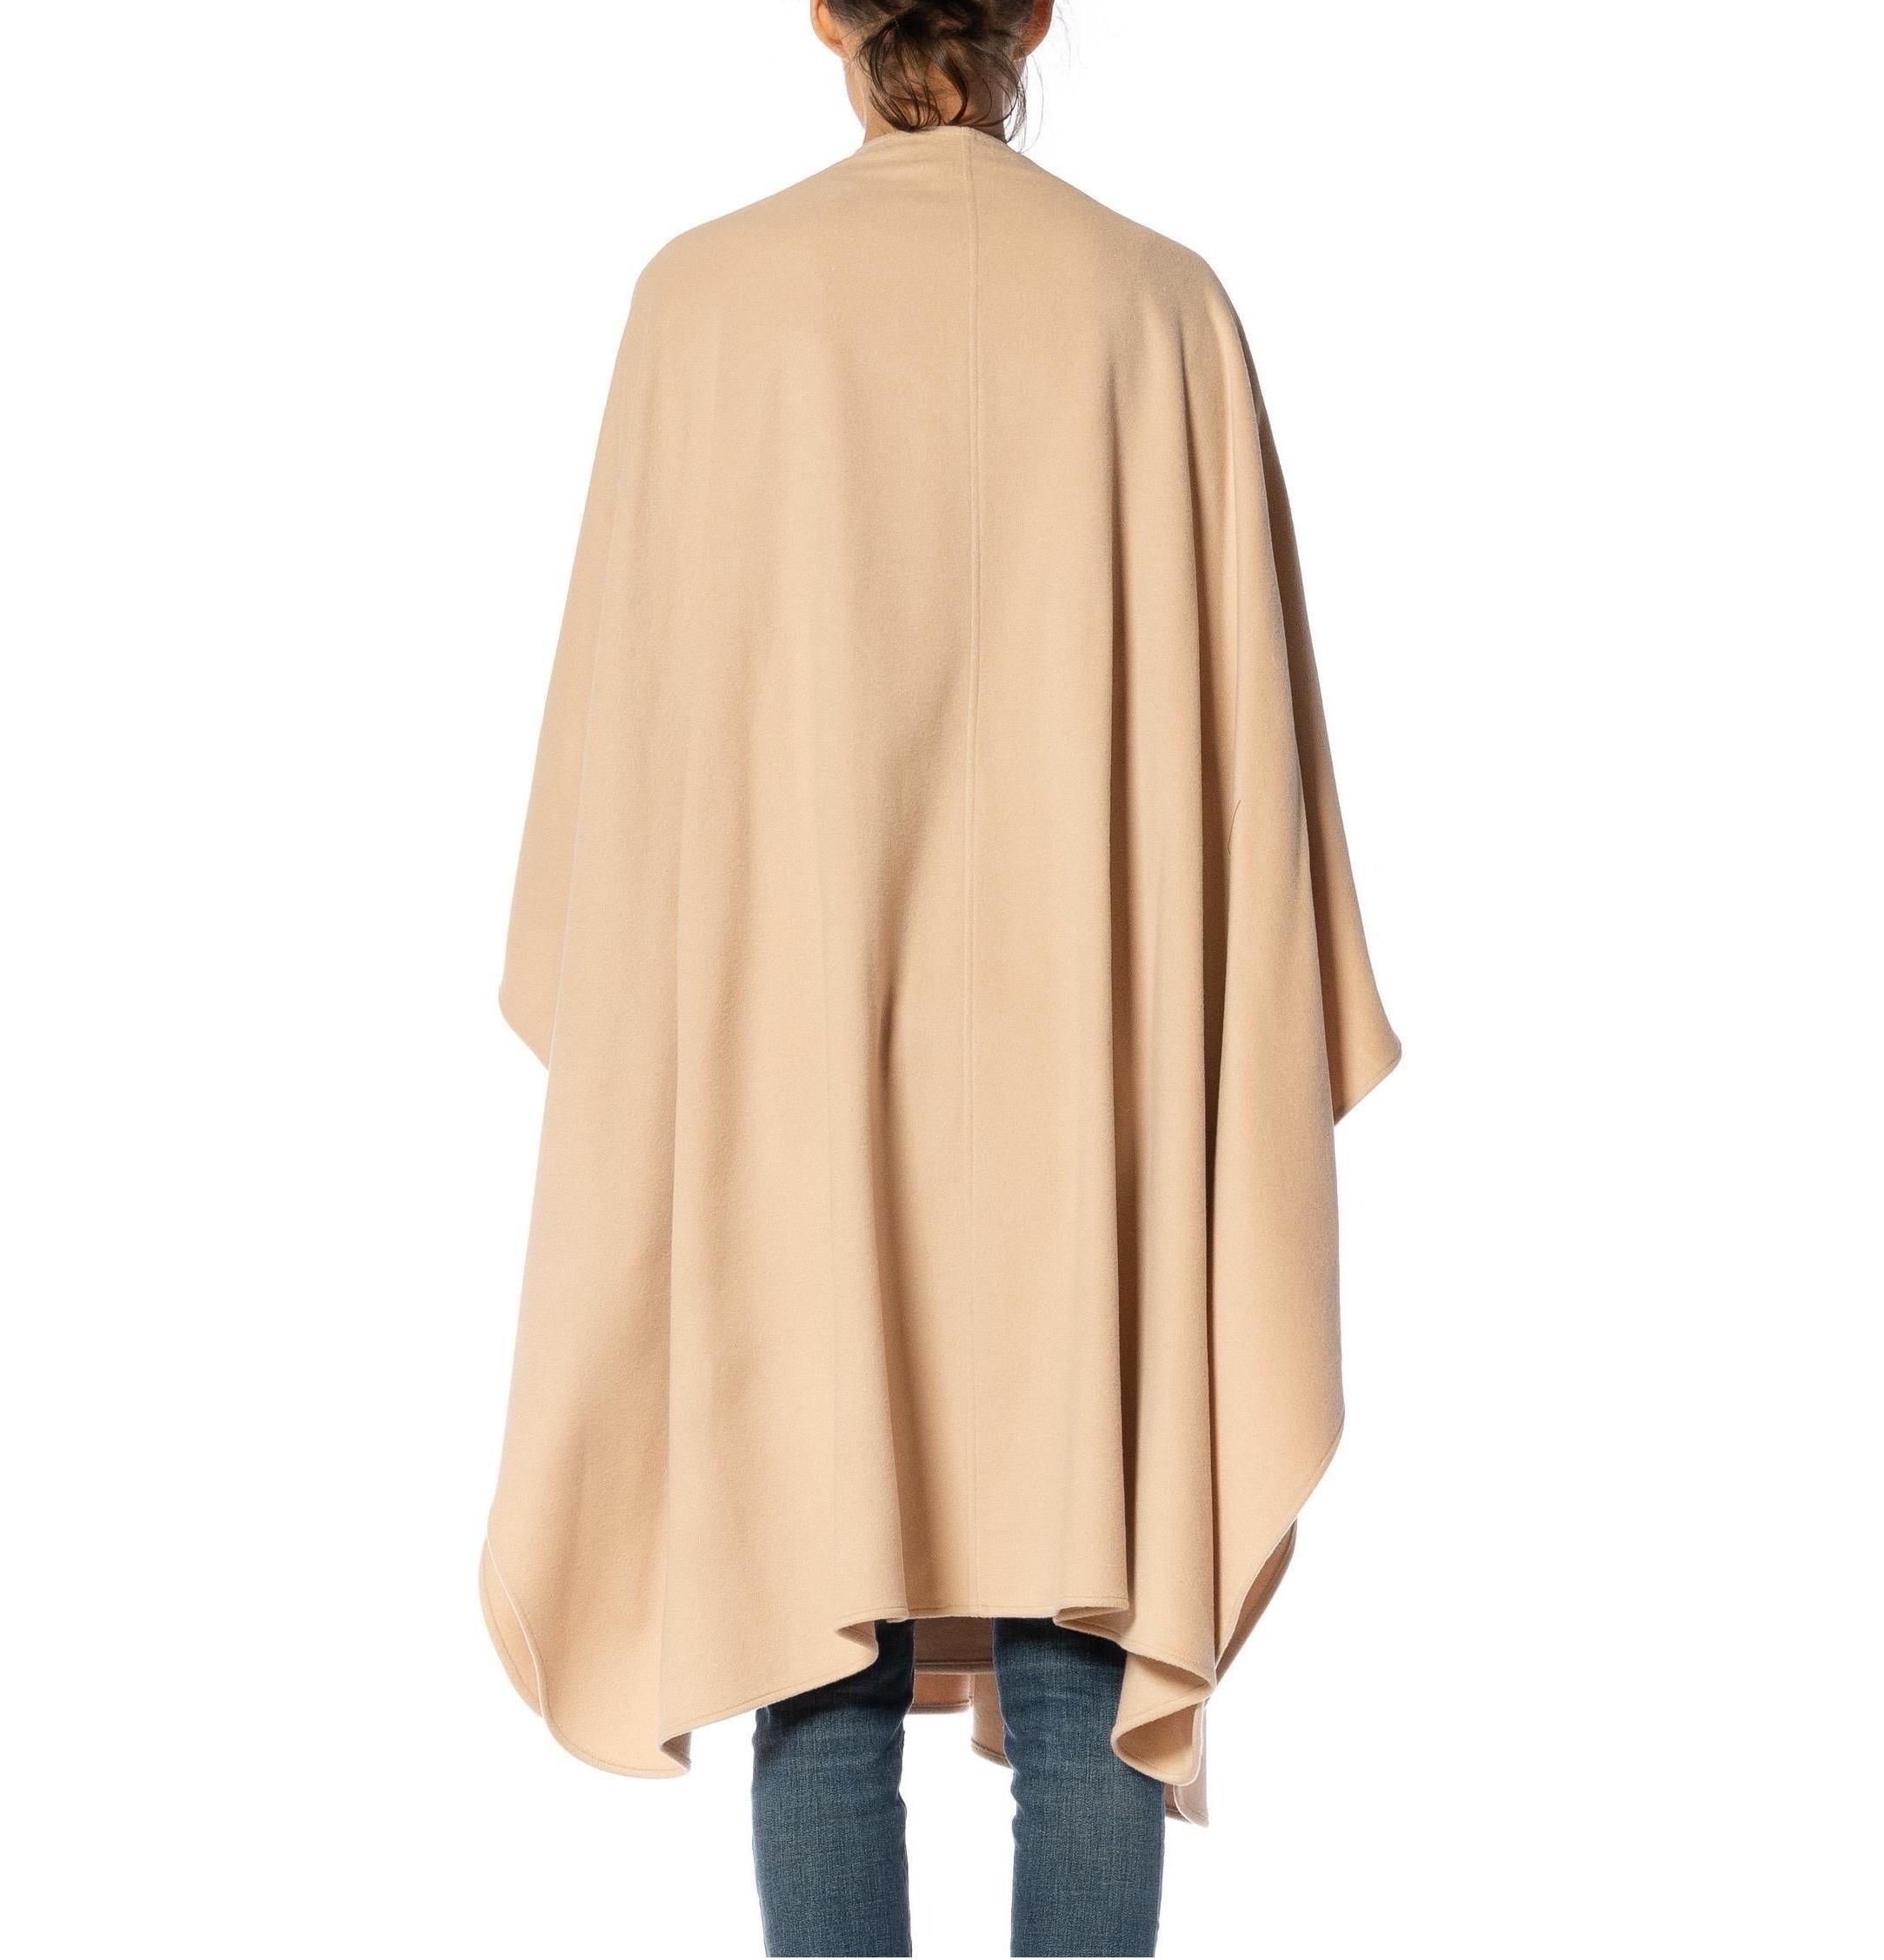 2000S GENNY Beige Cashmere Shawl For Sale 4